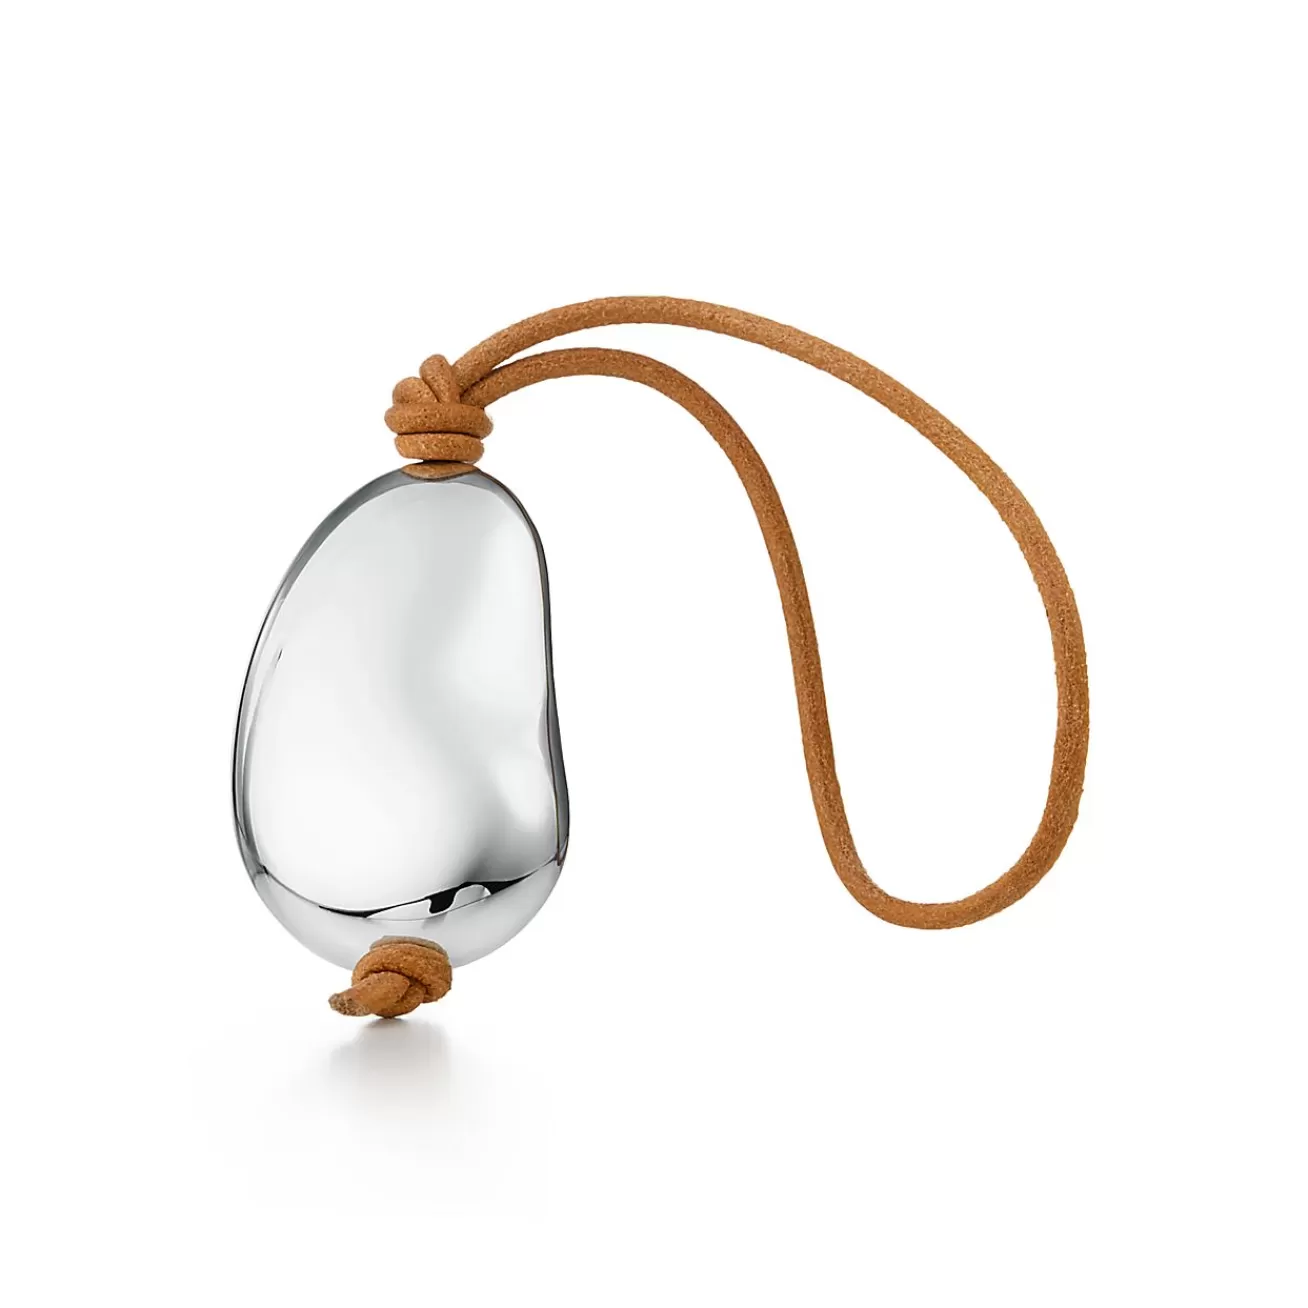 Tiffany & Co. Elsa Peretti® Bean® key ring in sterling silver with leather. | ^ Key Rings | Accessories